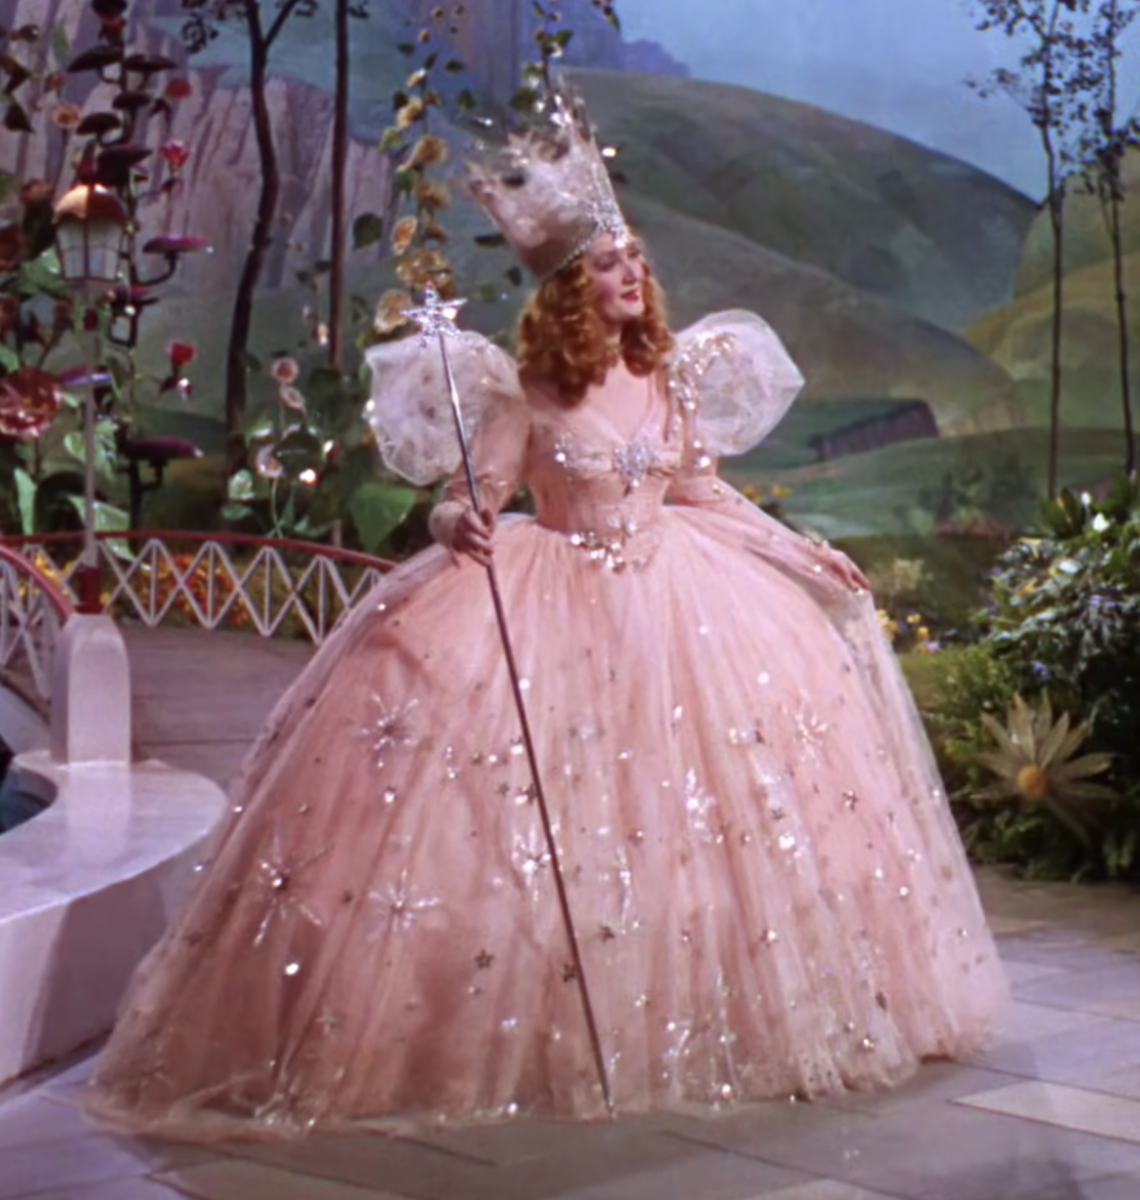 Glinda from the The Wizard of Oz